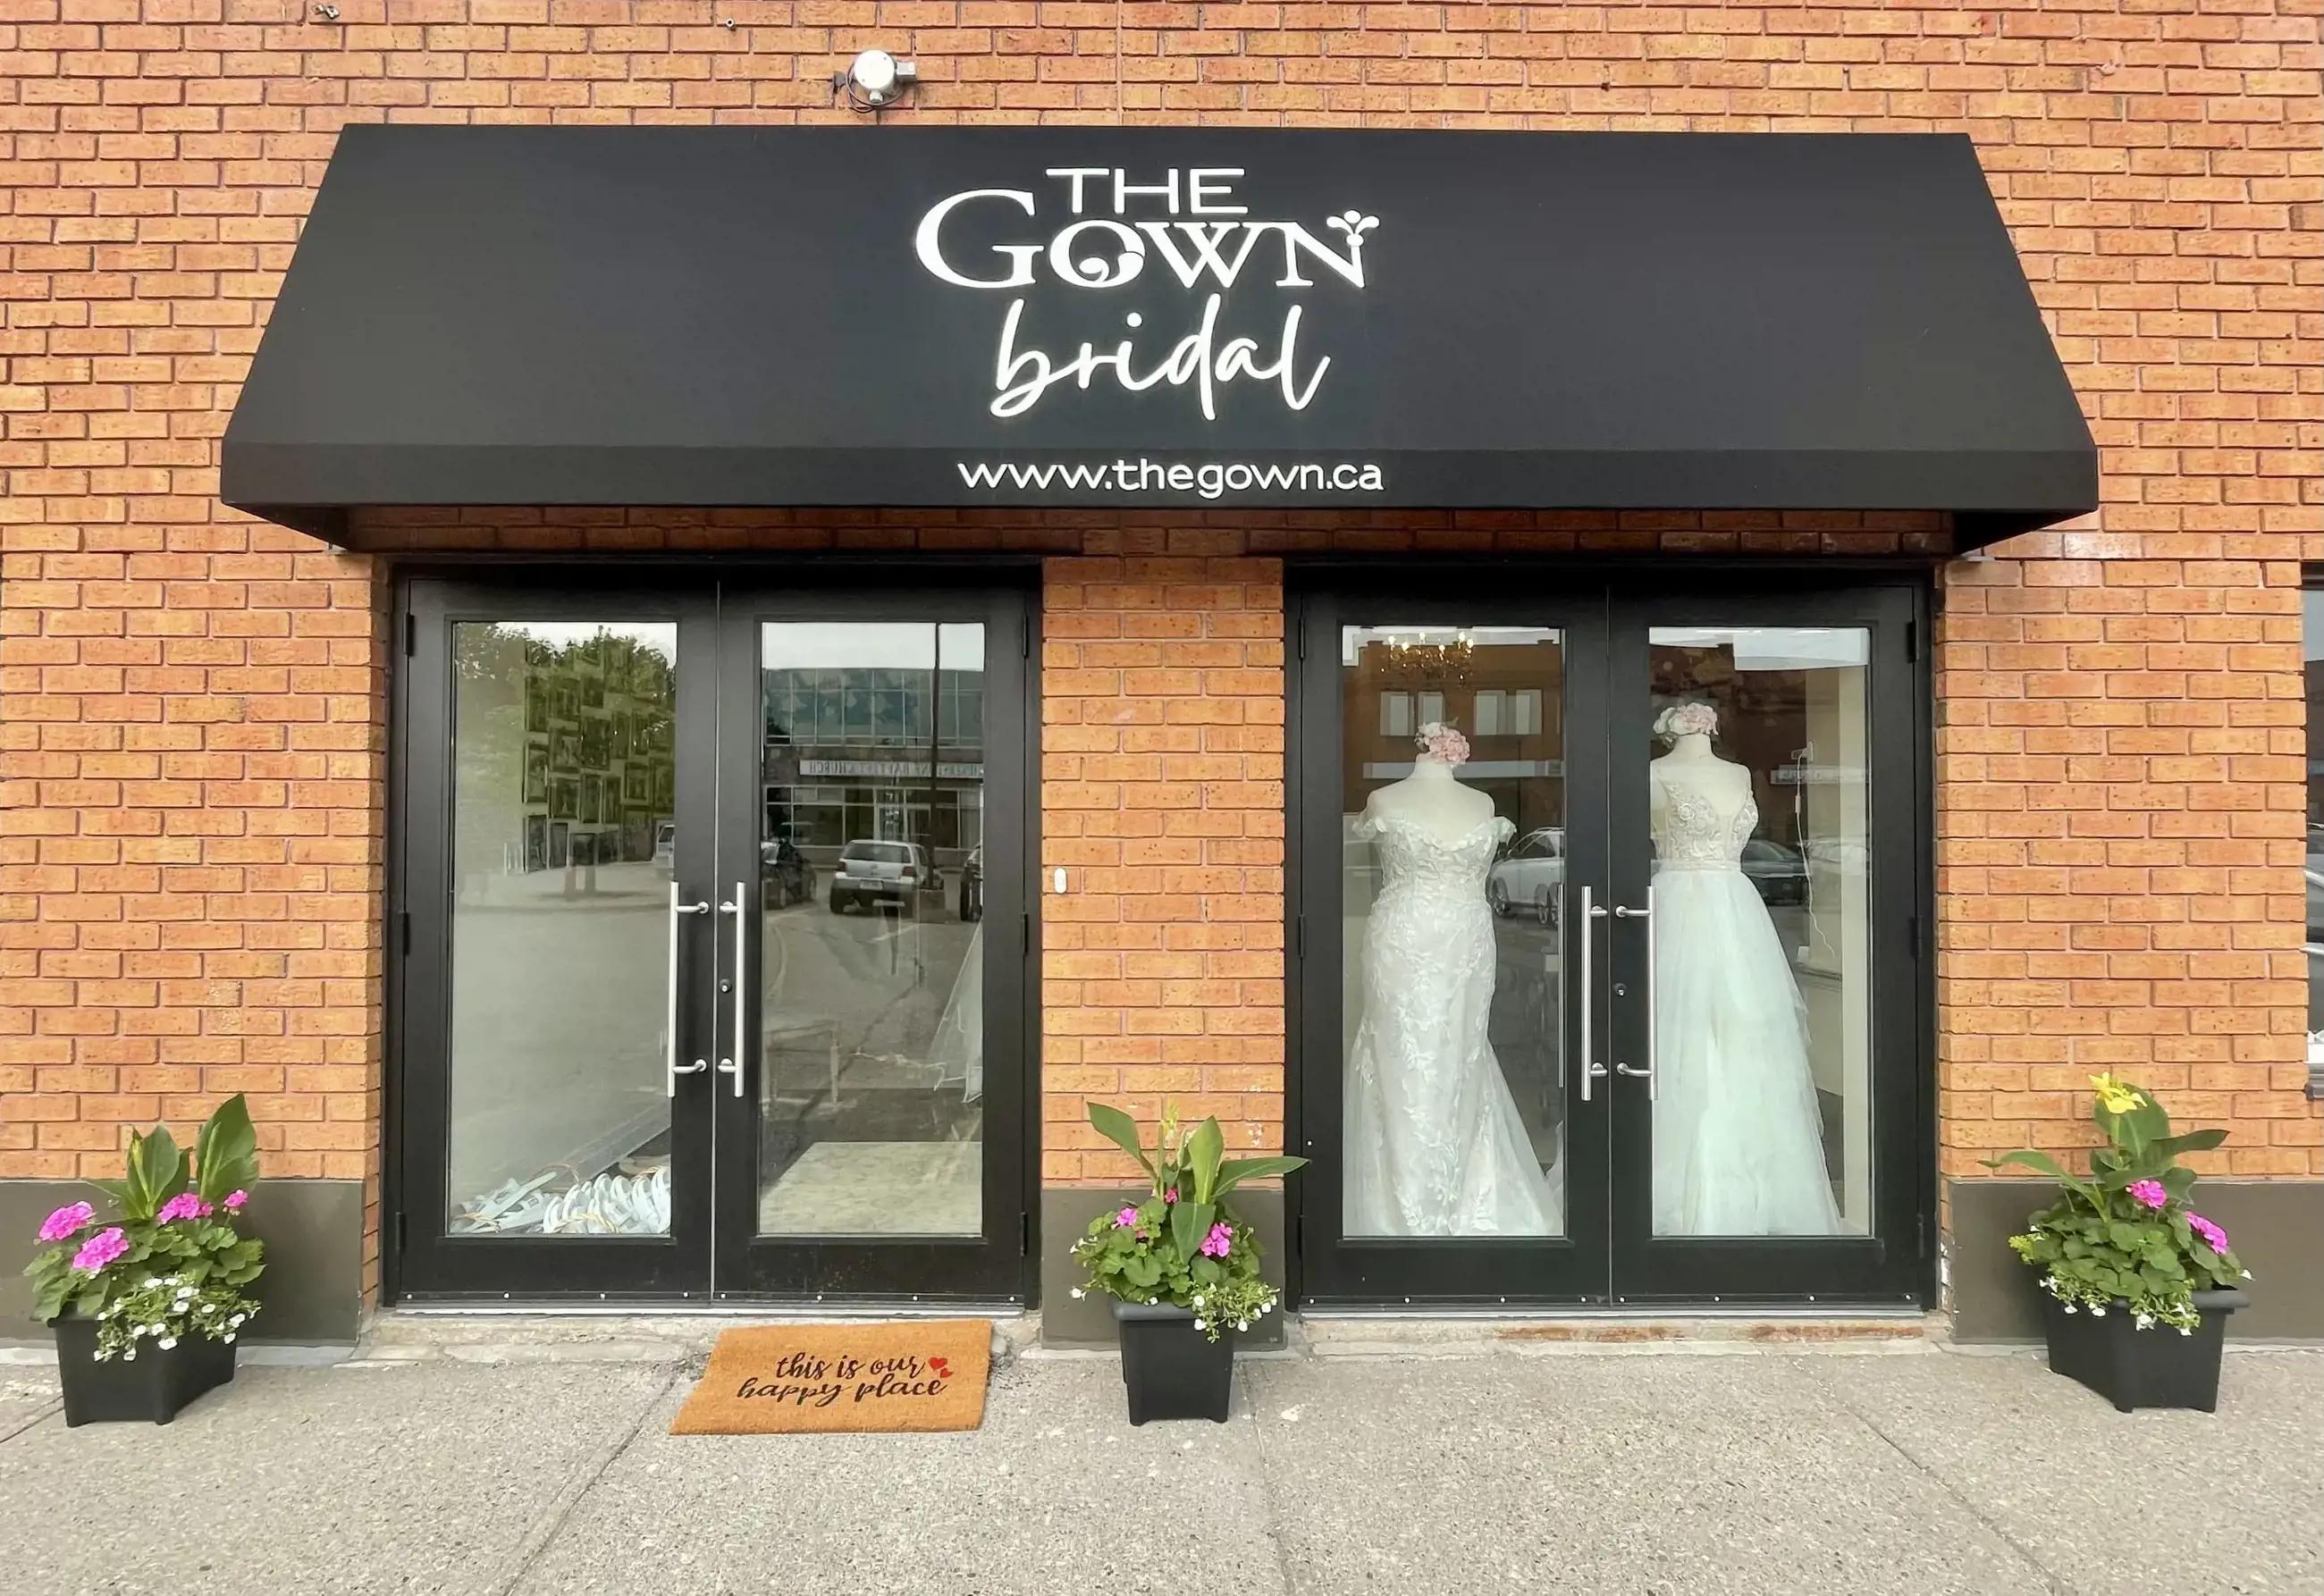 UNFORGETTABLE BRIDAL BOUTIQUE - 1435 Myers St, Oroville